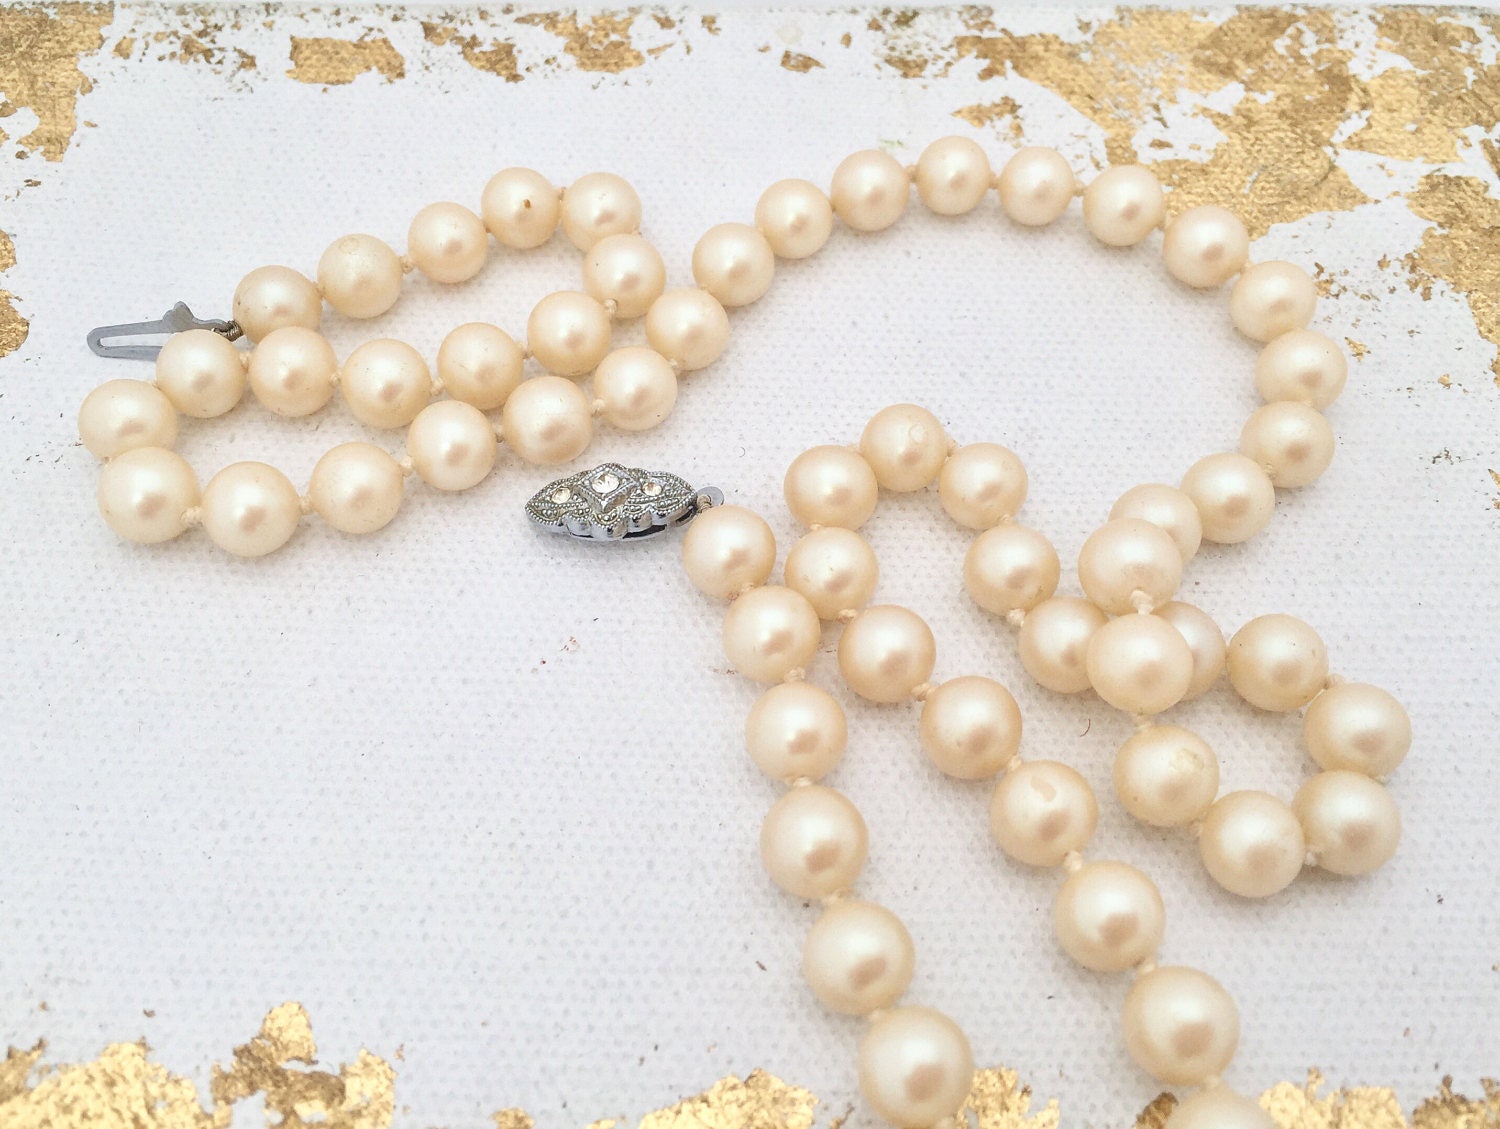 Pearl Necklace and Bracelet Set, Vintage Faux Pearls, Blue, Grey or Gold  White Pearl, Classic Gift for Her Bridal Jewellery 